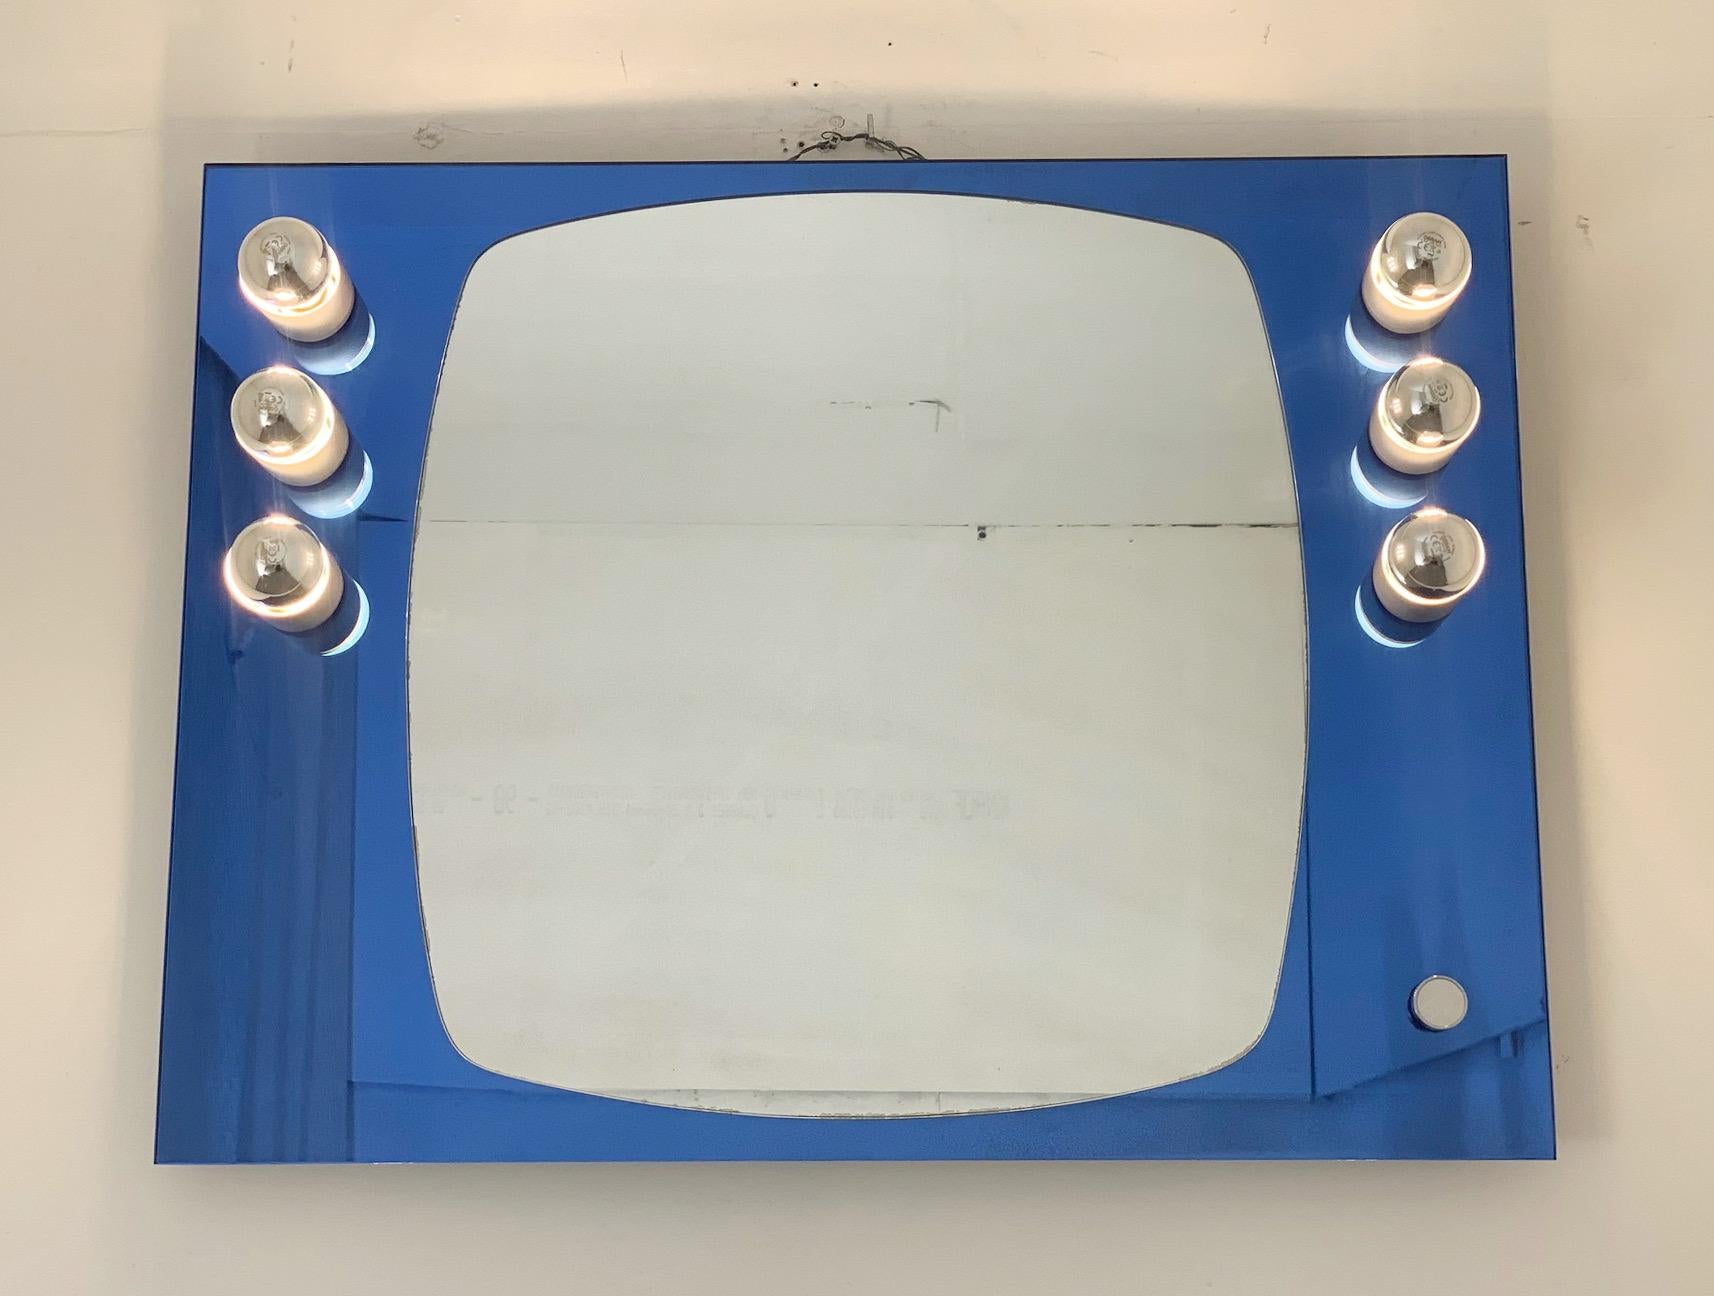 Vintage Italian rectangular mirror with blue beveled glass, illuminated with 6 lights including a light dimmer / Made in Italy by Veca, circa 1960s
Original 